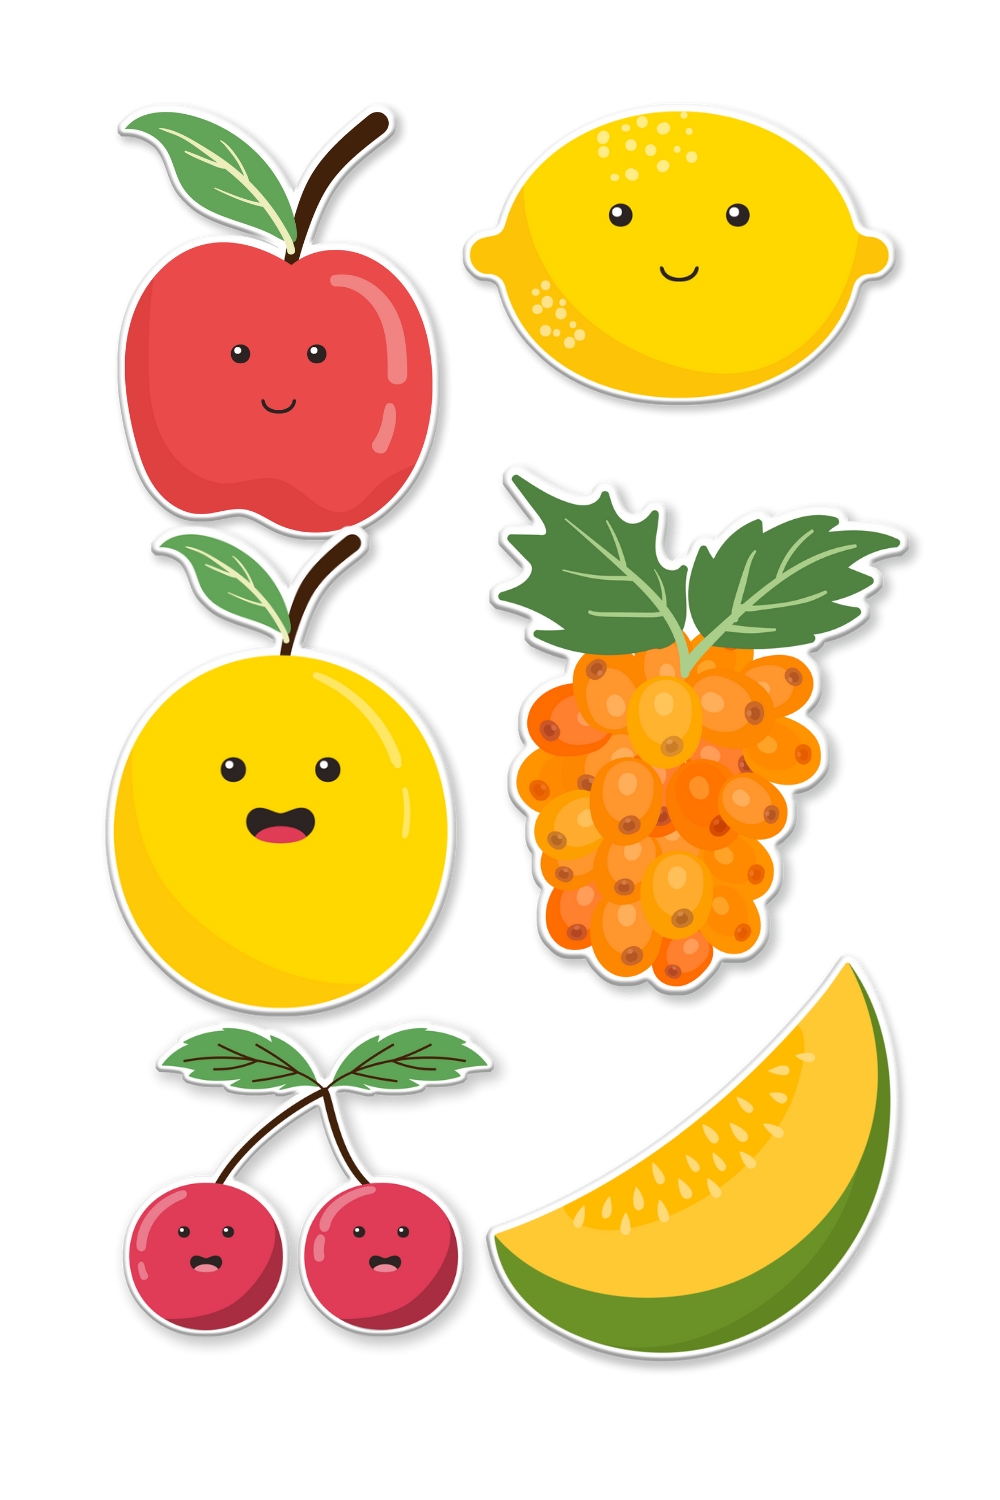 Fruit stickers design pinterest preview image.